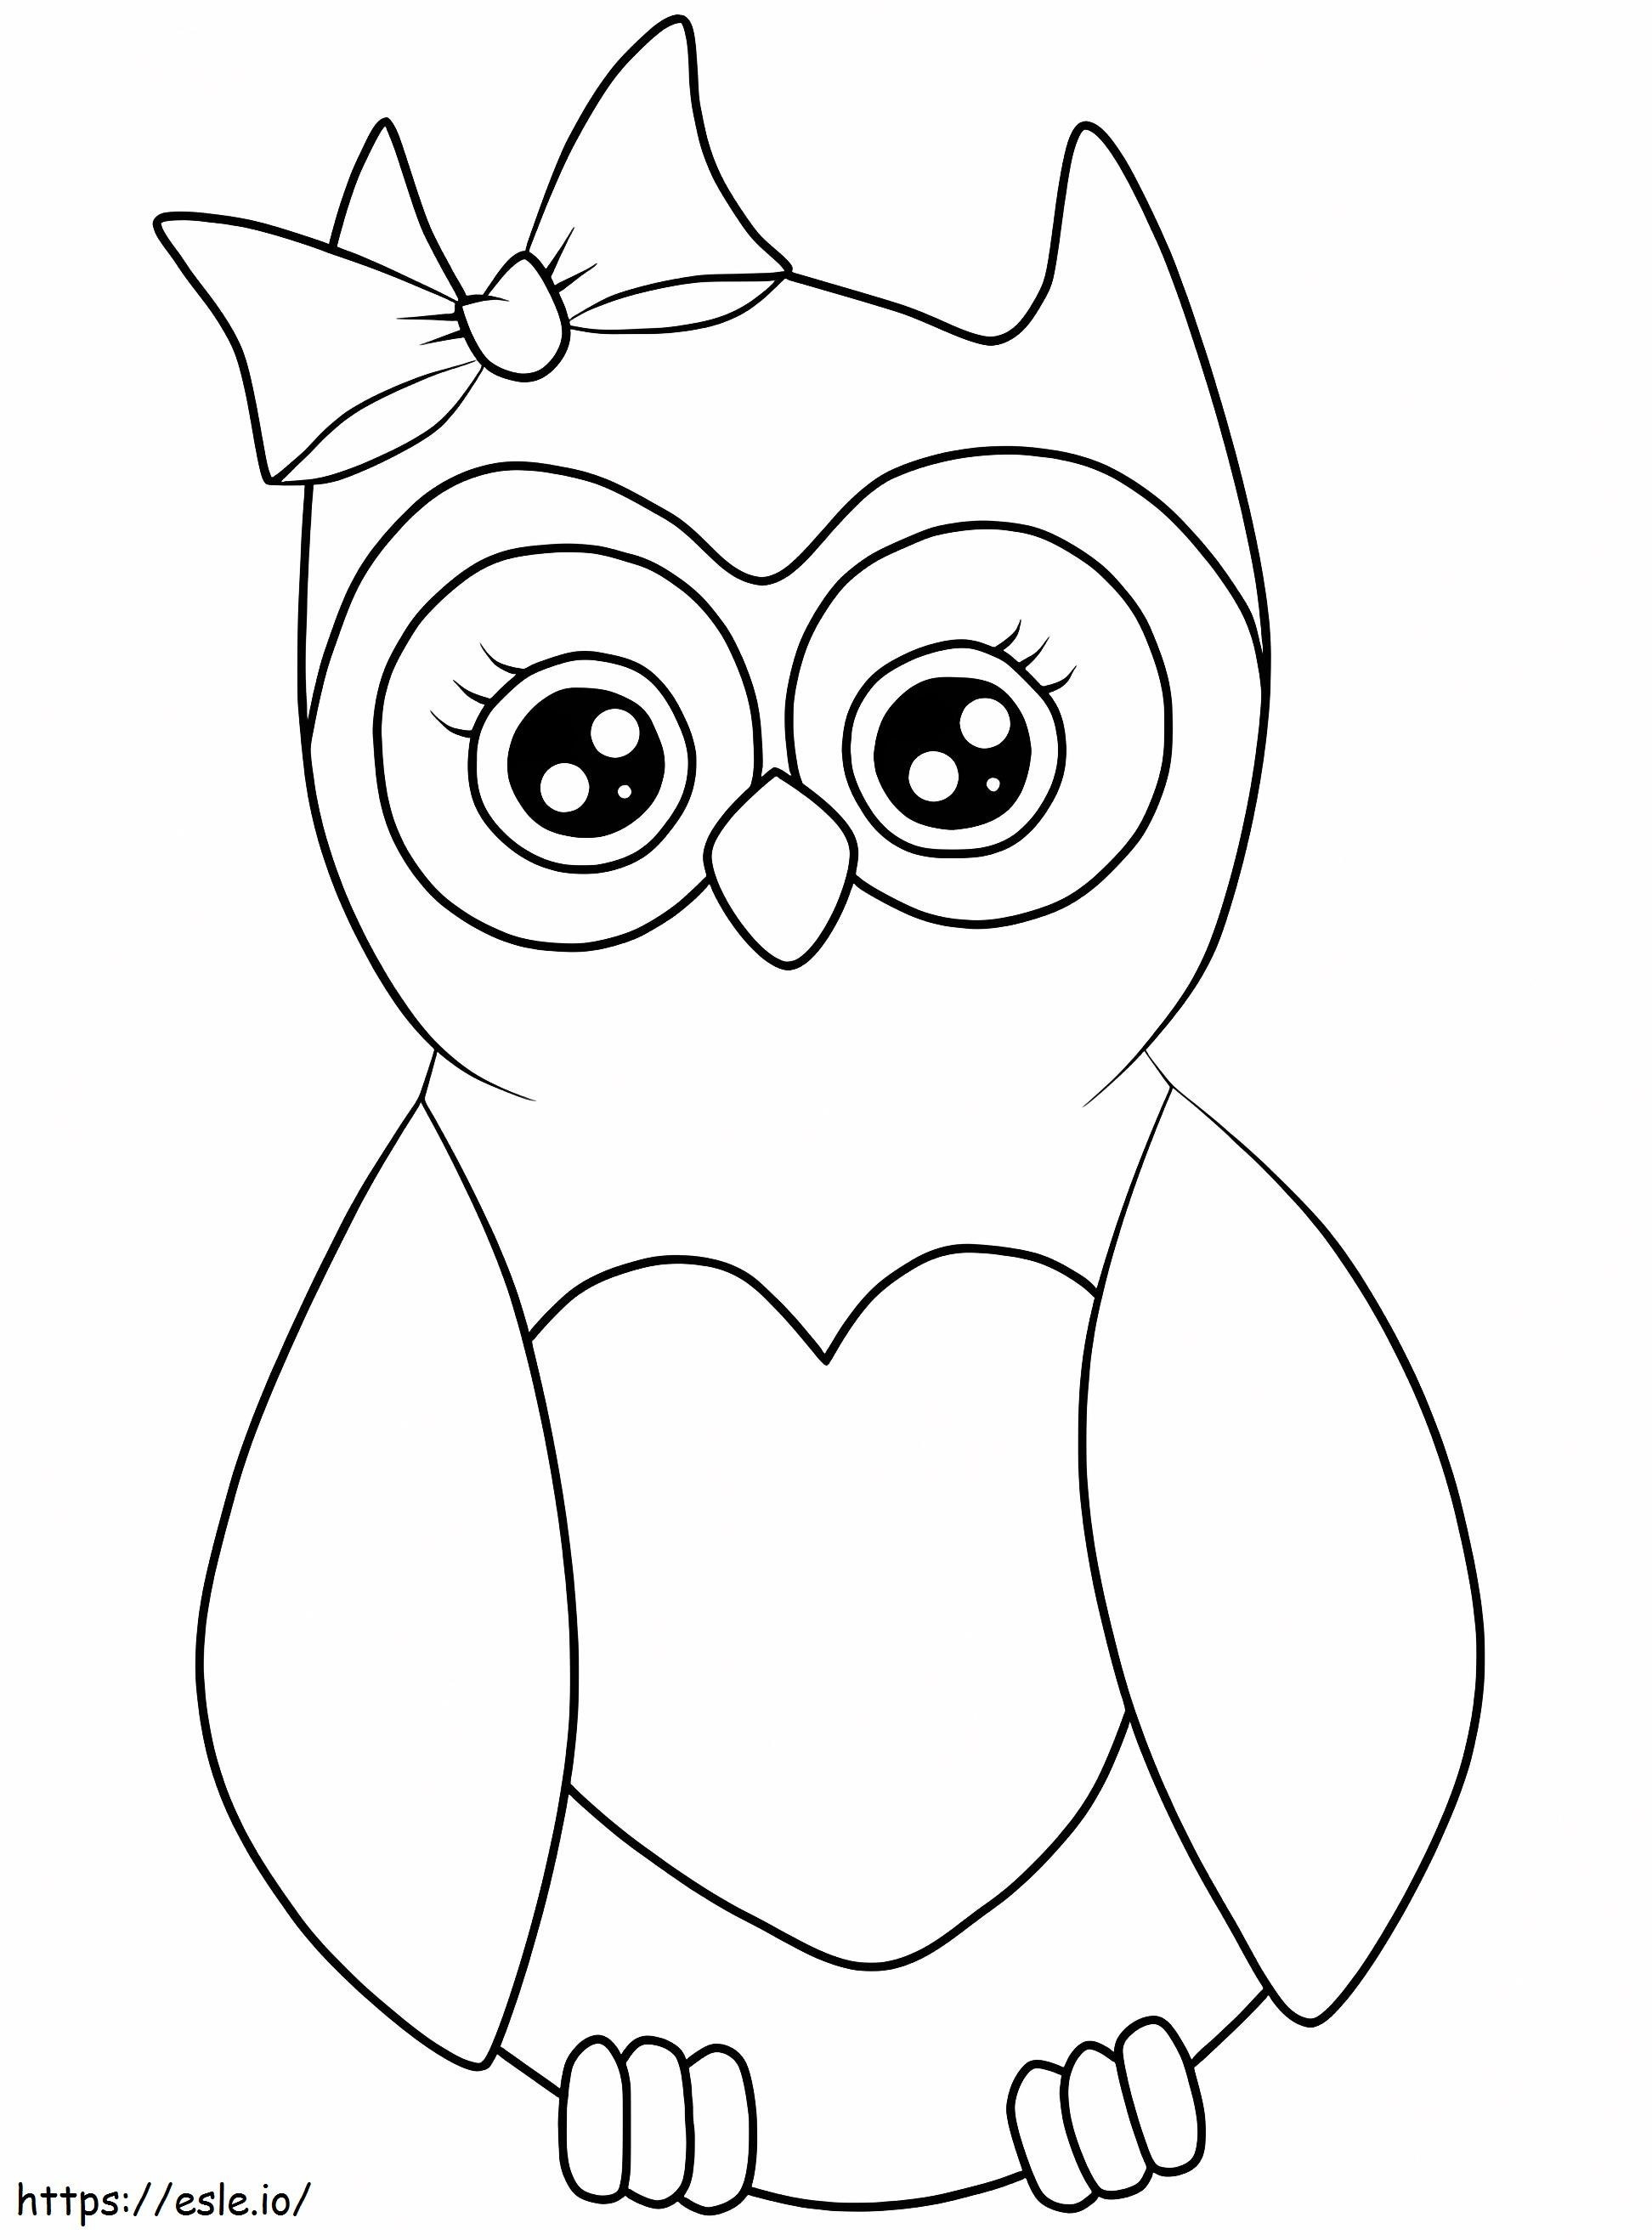 1560327670 Owl With Hair Bow A4 coloring page